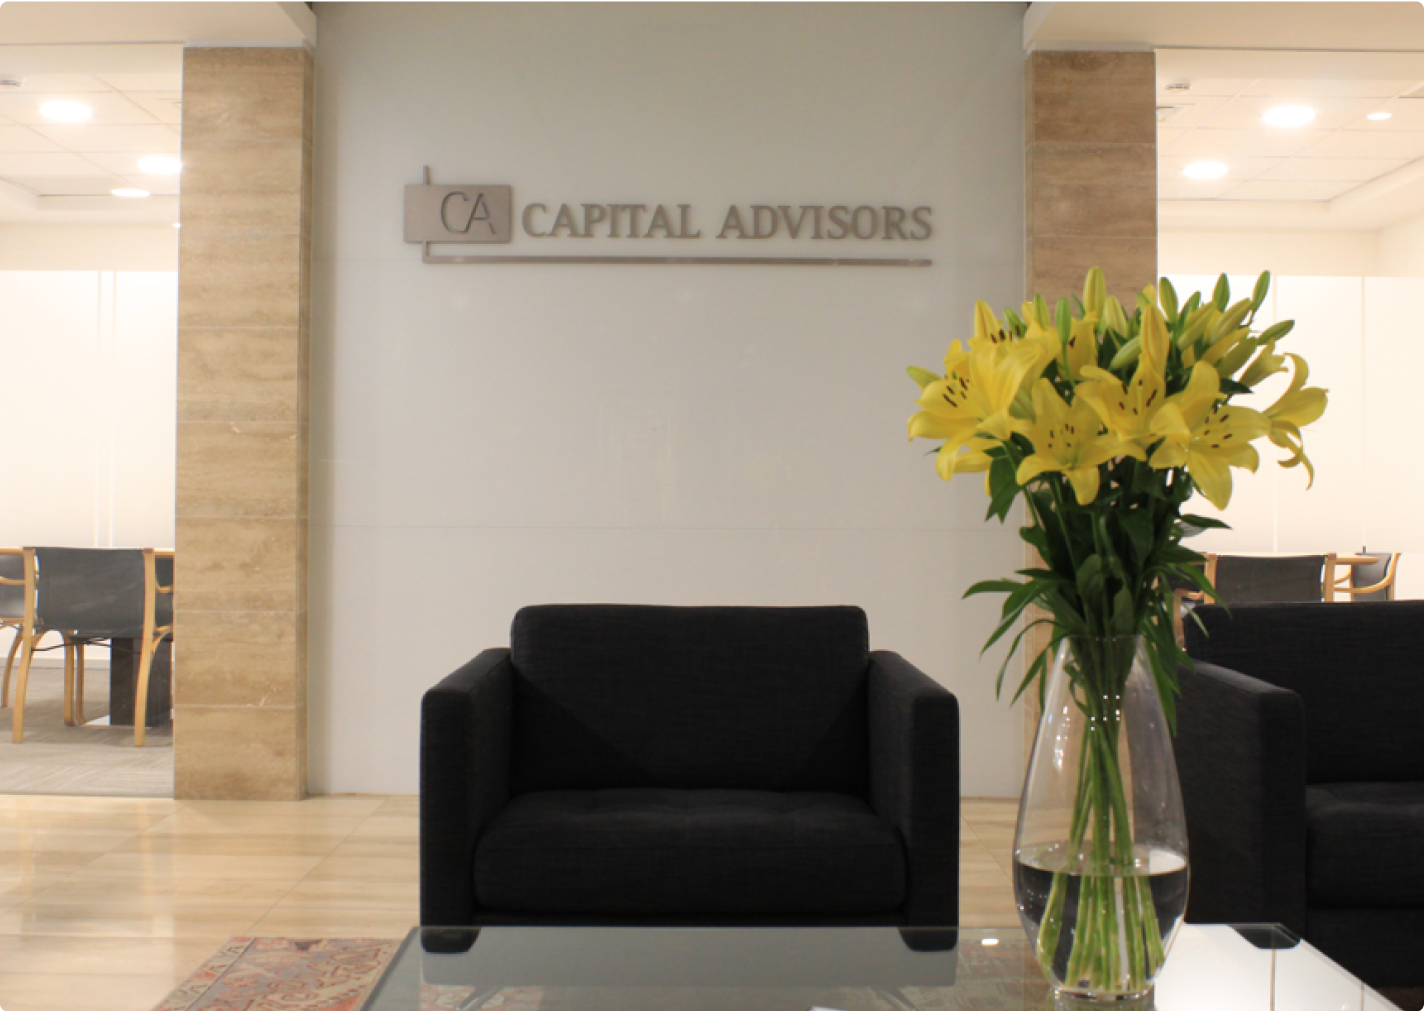 Photo of Capital Advisors Office with a decorative yellow flower.